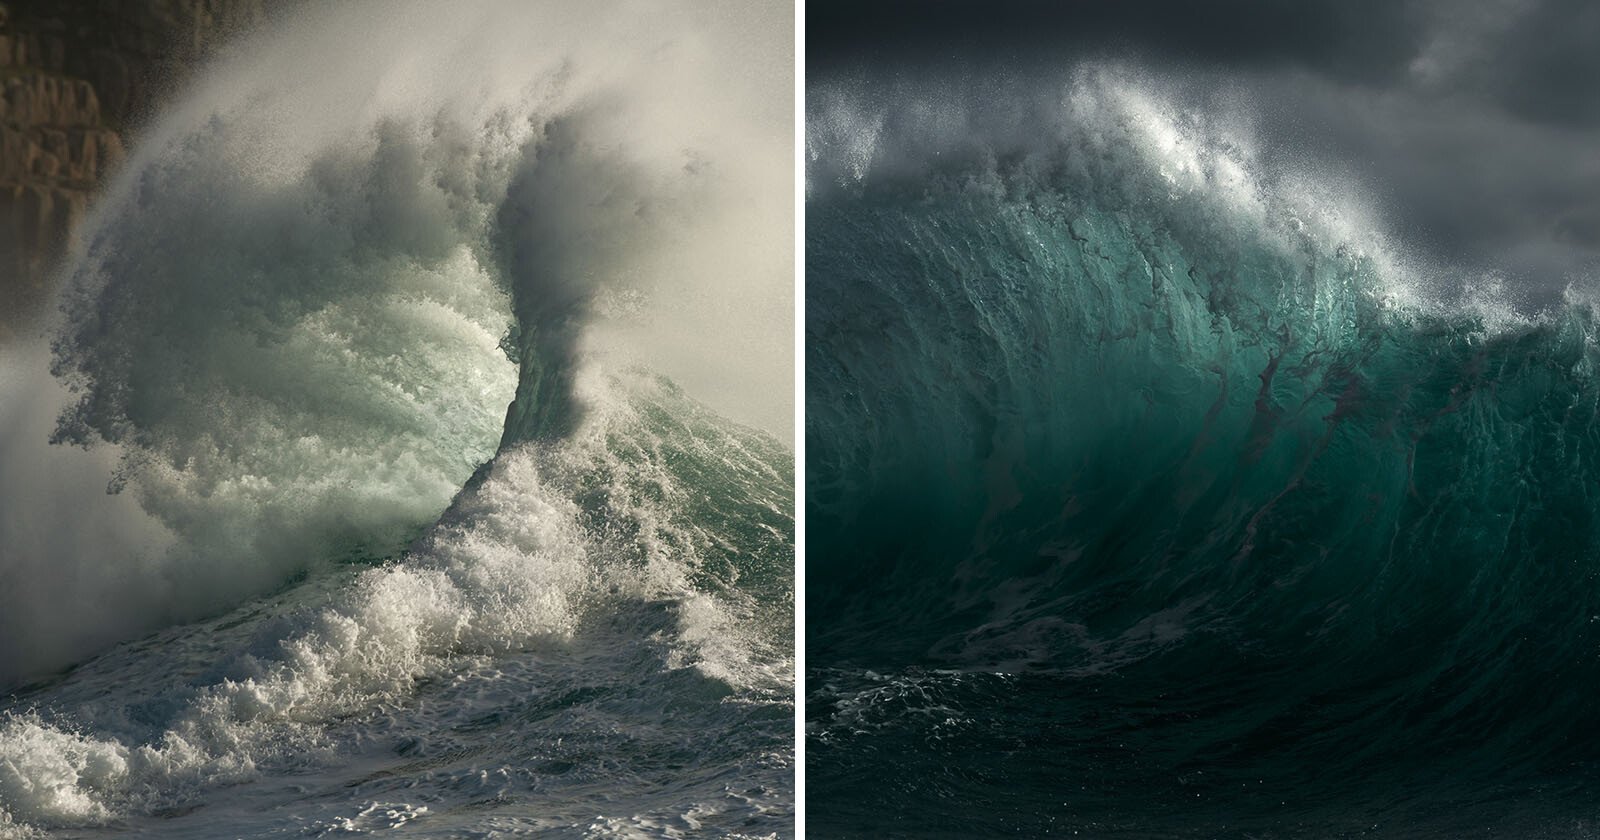 A Photographers Journey Capturing the Beautiful Violence of the Ocean